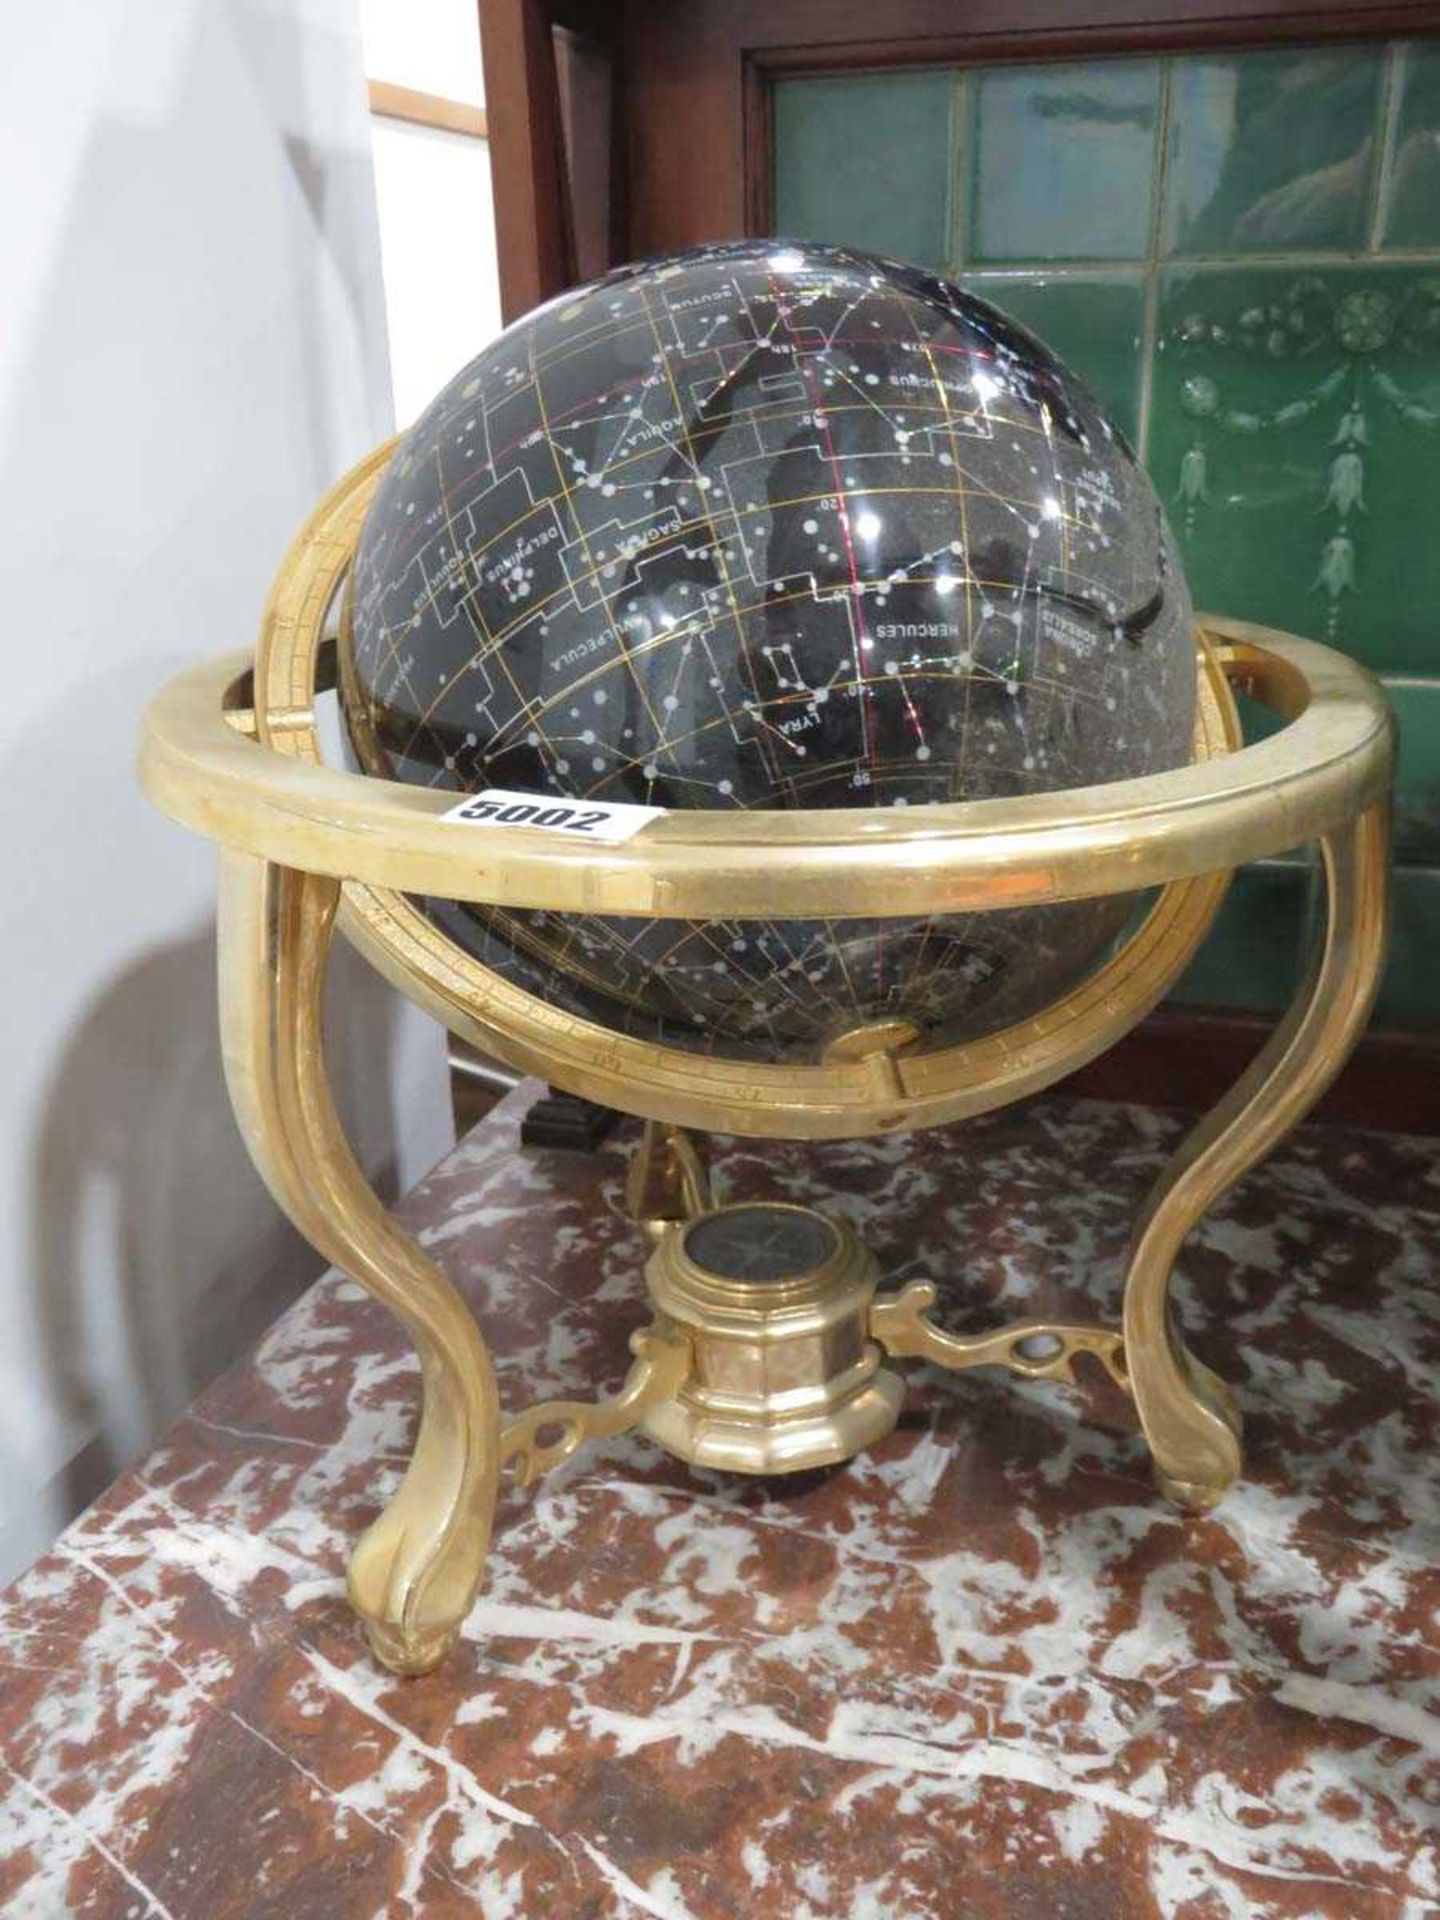 Small gem set astronomical globe contained within a brass stand